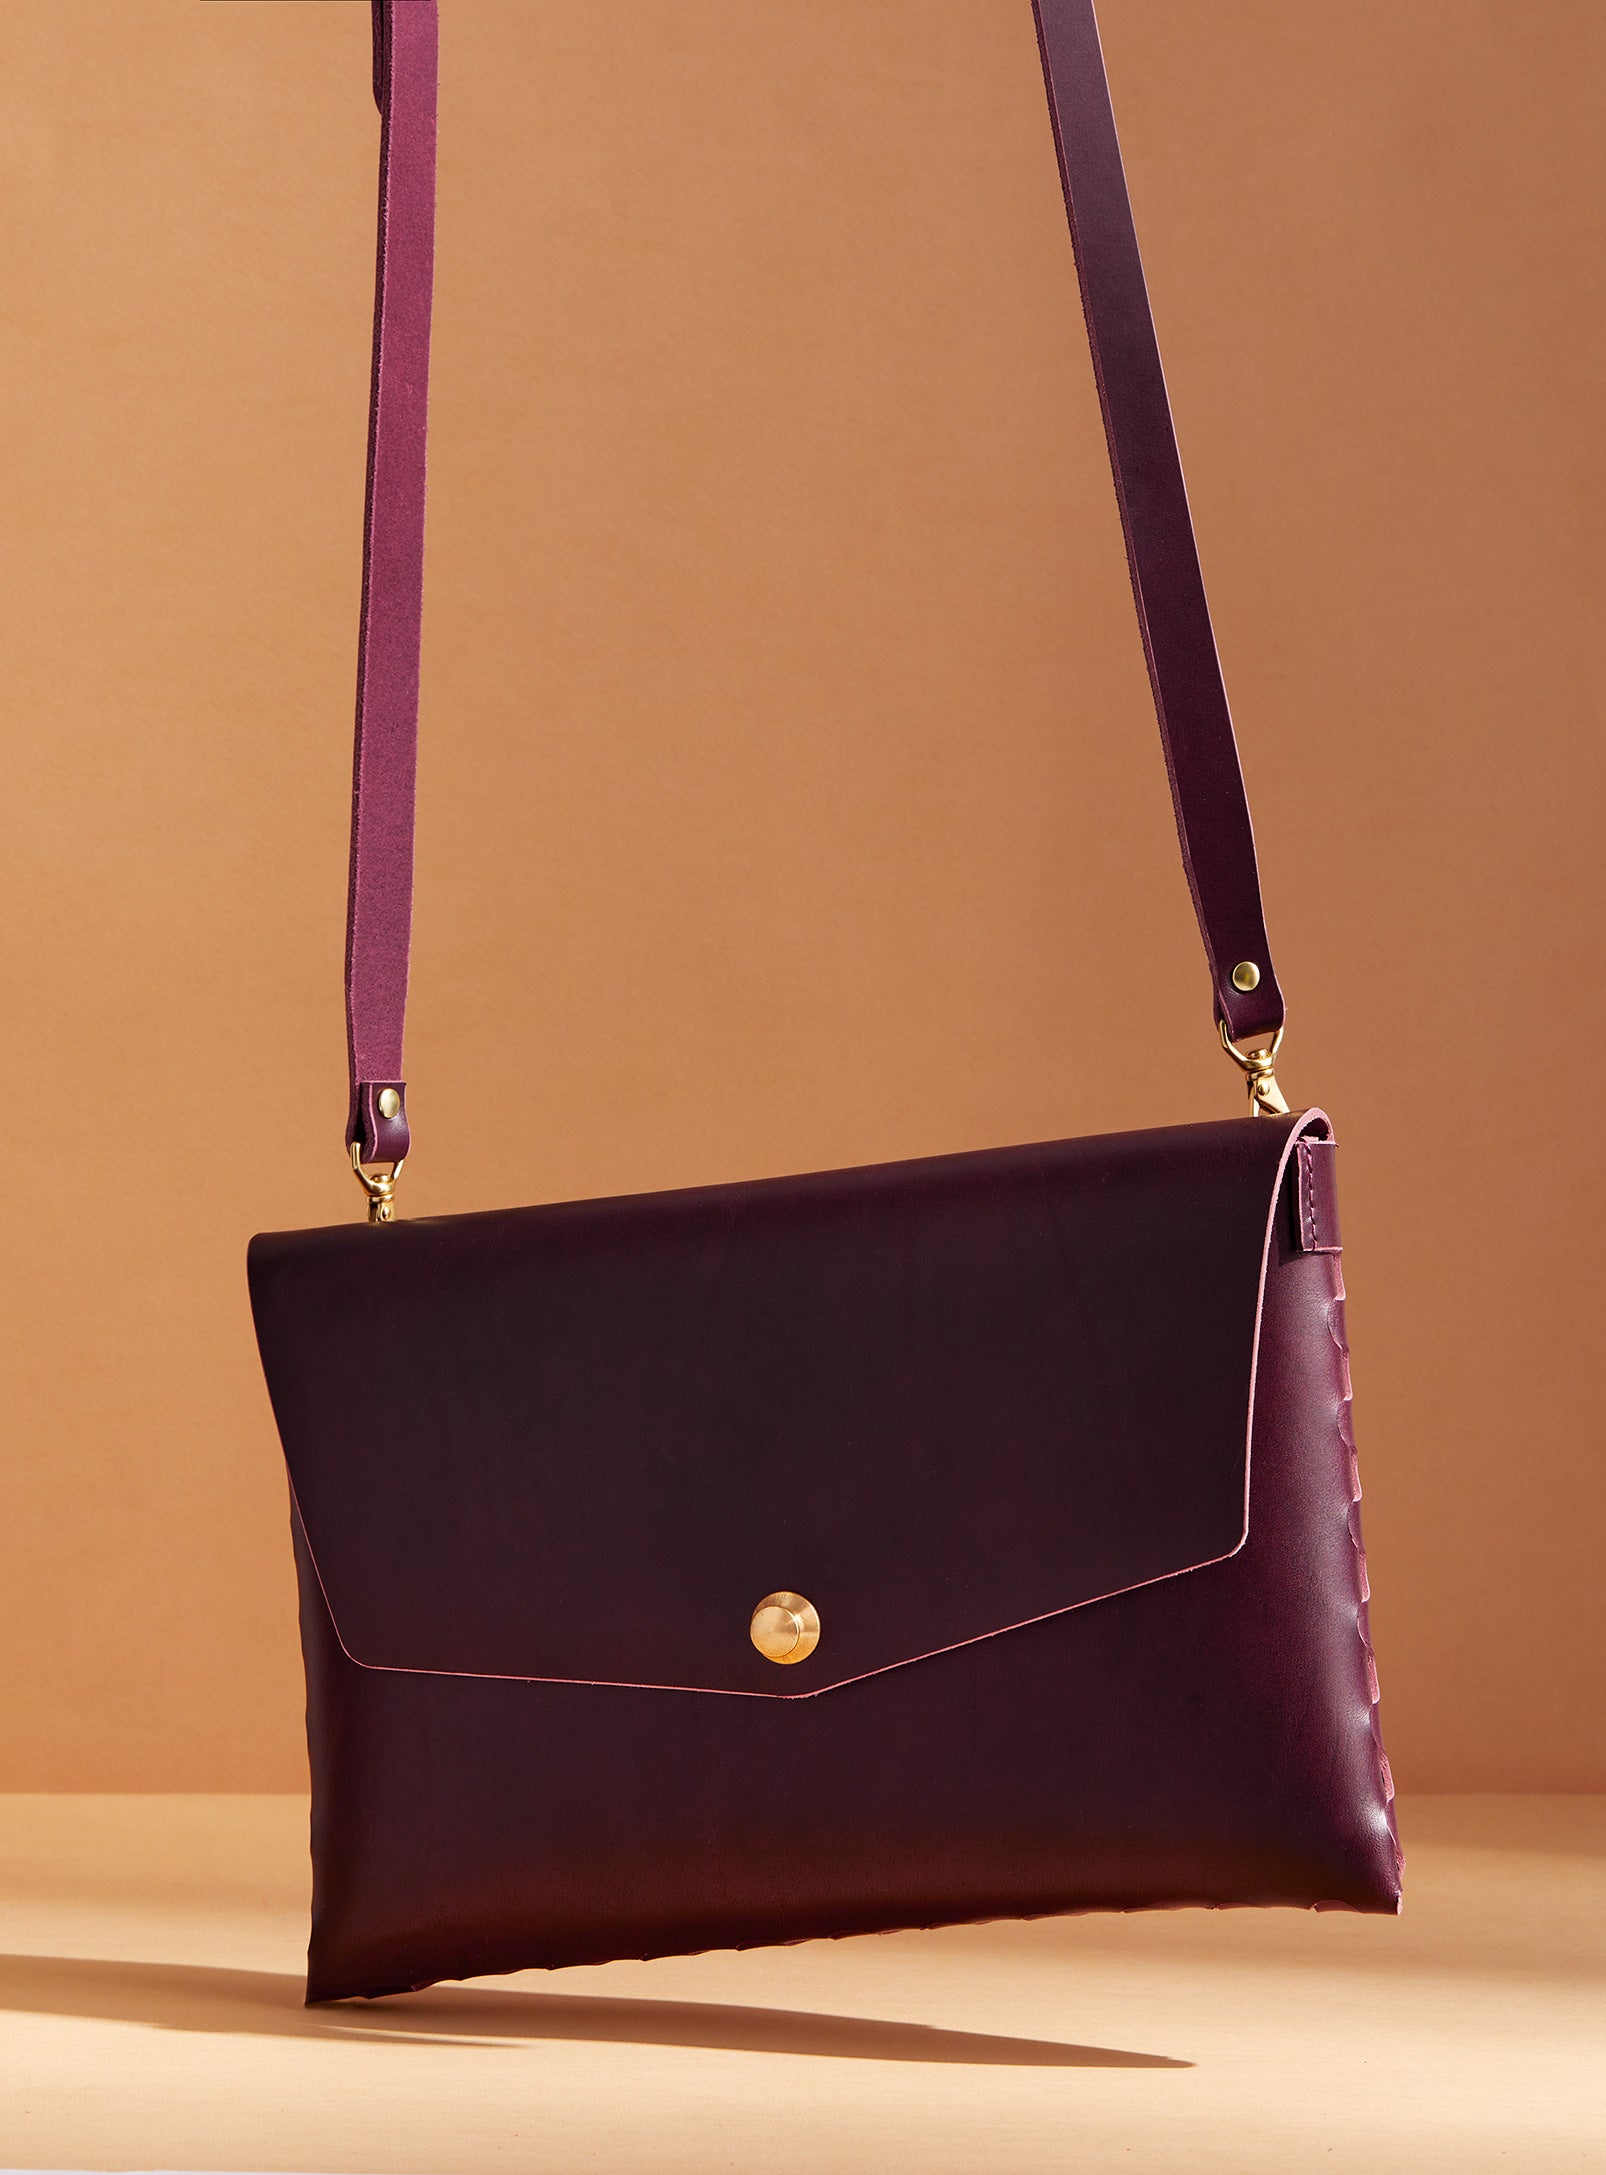 modjūl’s leather mini bag deluxe bag in burgundy. A larger take on the classic mini bag, a rectangular-shaped bag with long detachable straps, handcrafted in Canada using quality Italian leather and brass hardware.